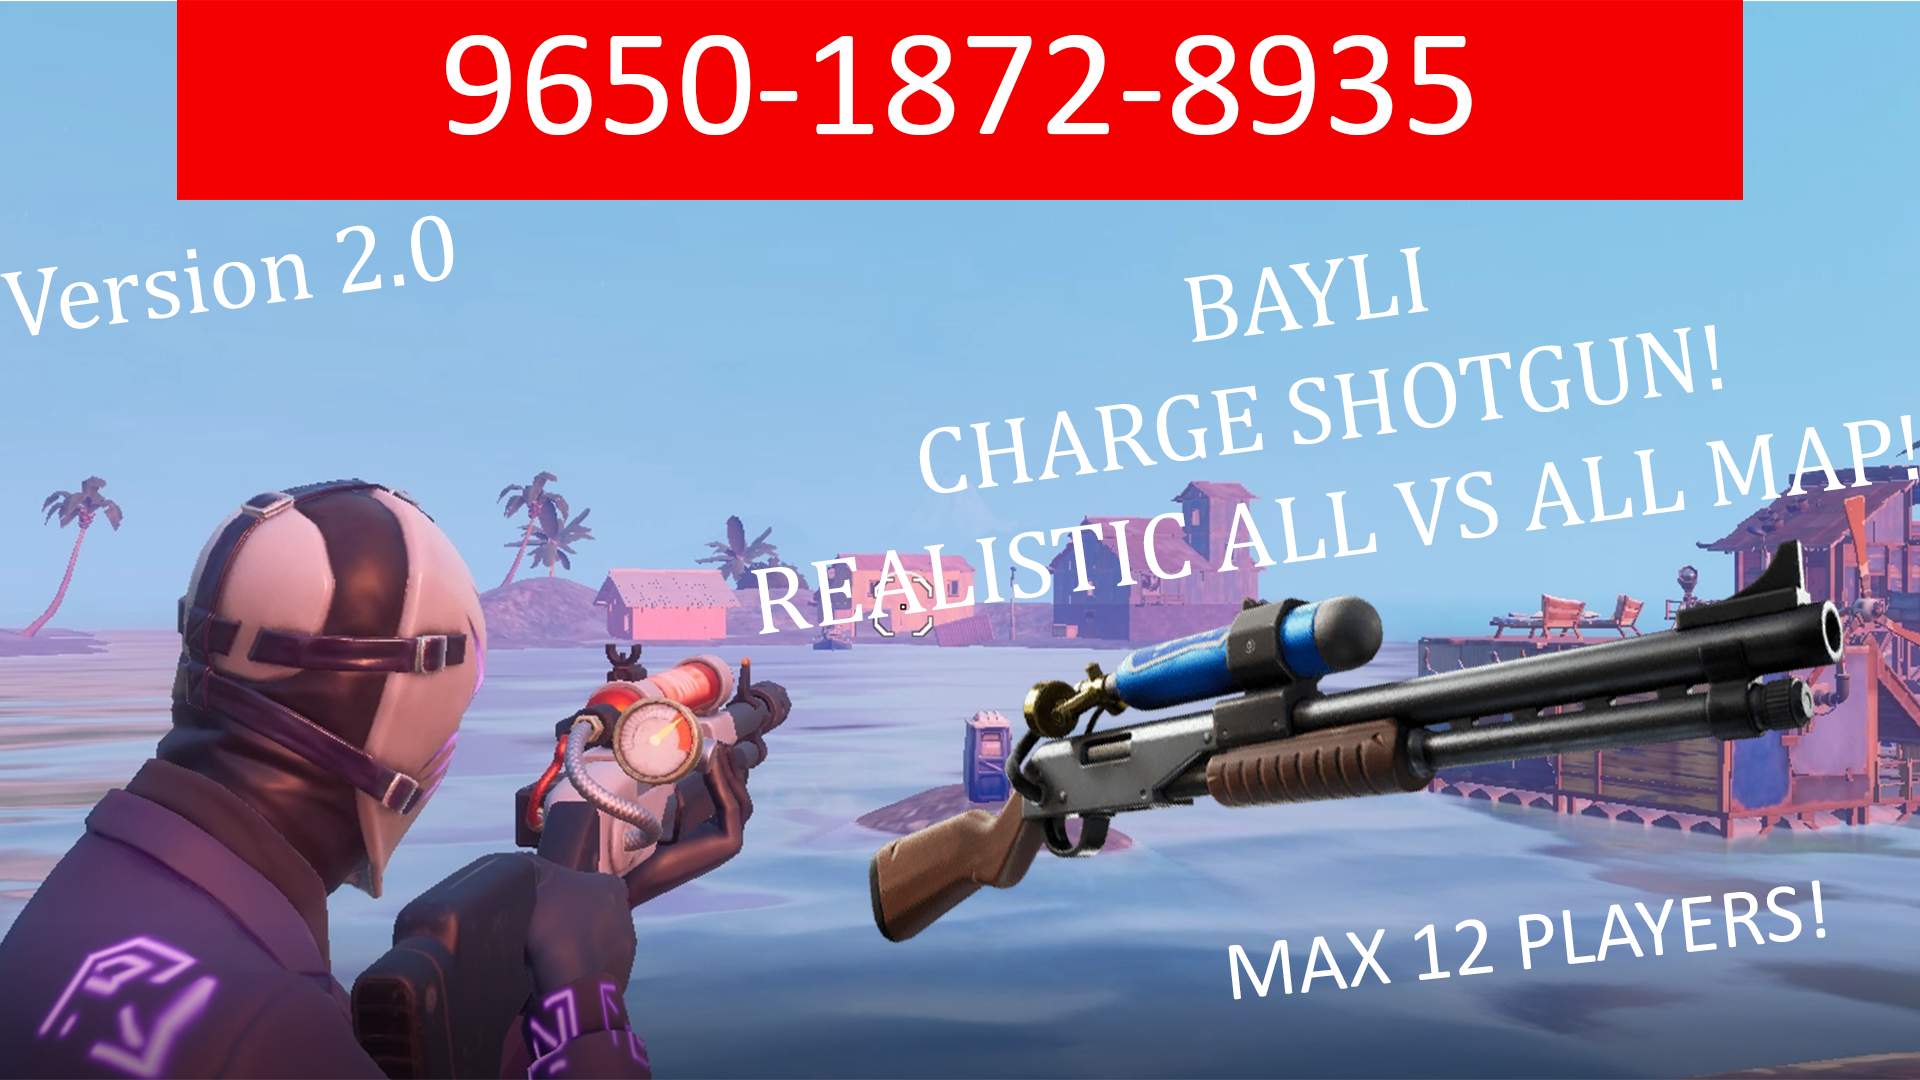 BAYLI'S REALISTIC ALL VS ALL CHARGE MAP!